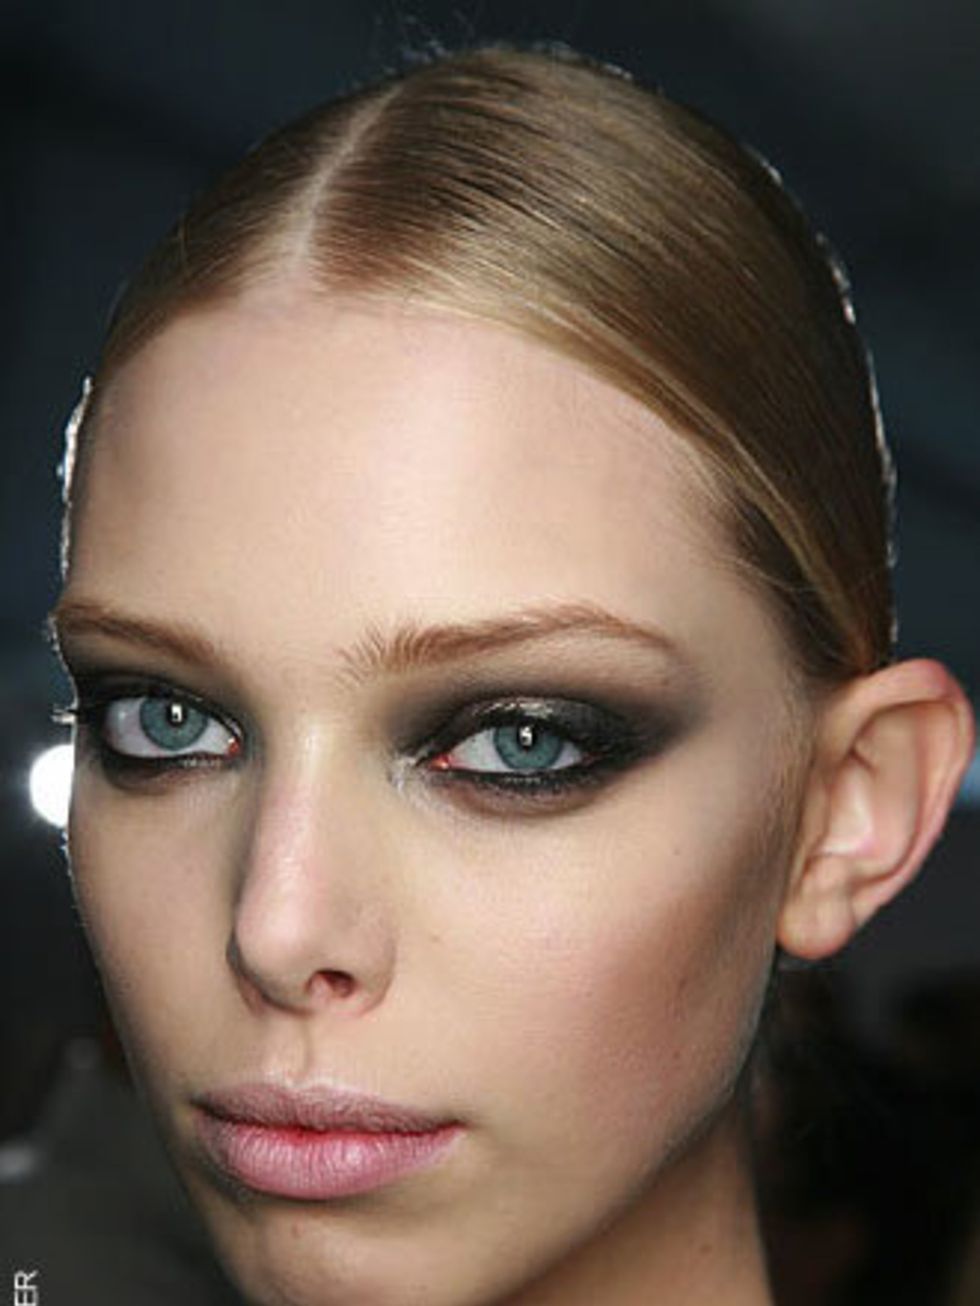 <p>Nod to the <a href="http://www.elleuk.com/beauty/Make-up-Skin/make-up-trends/%28section%29/The-Eighties">1980s</a> by sweeping your eye shadow out and up instead of using a wing of <a href="http://www.elleuk.com/beauty/celeb-beauty/celeb-make-up/%28sec